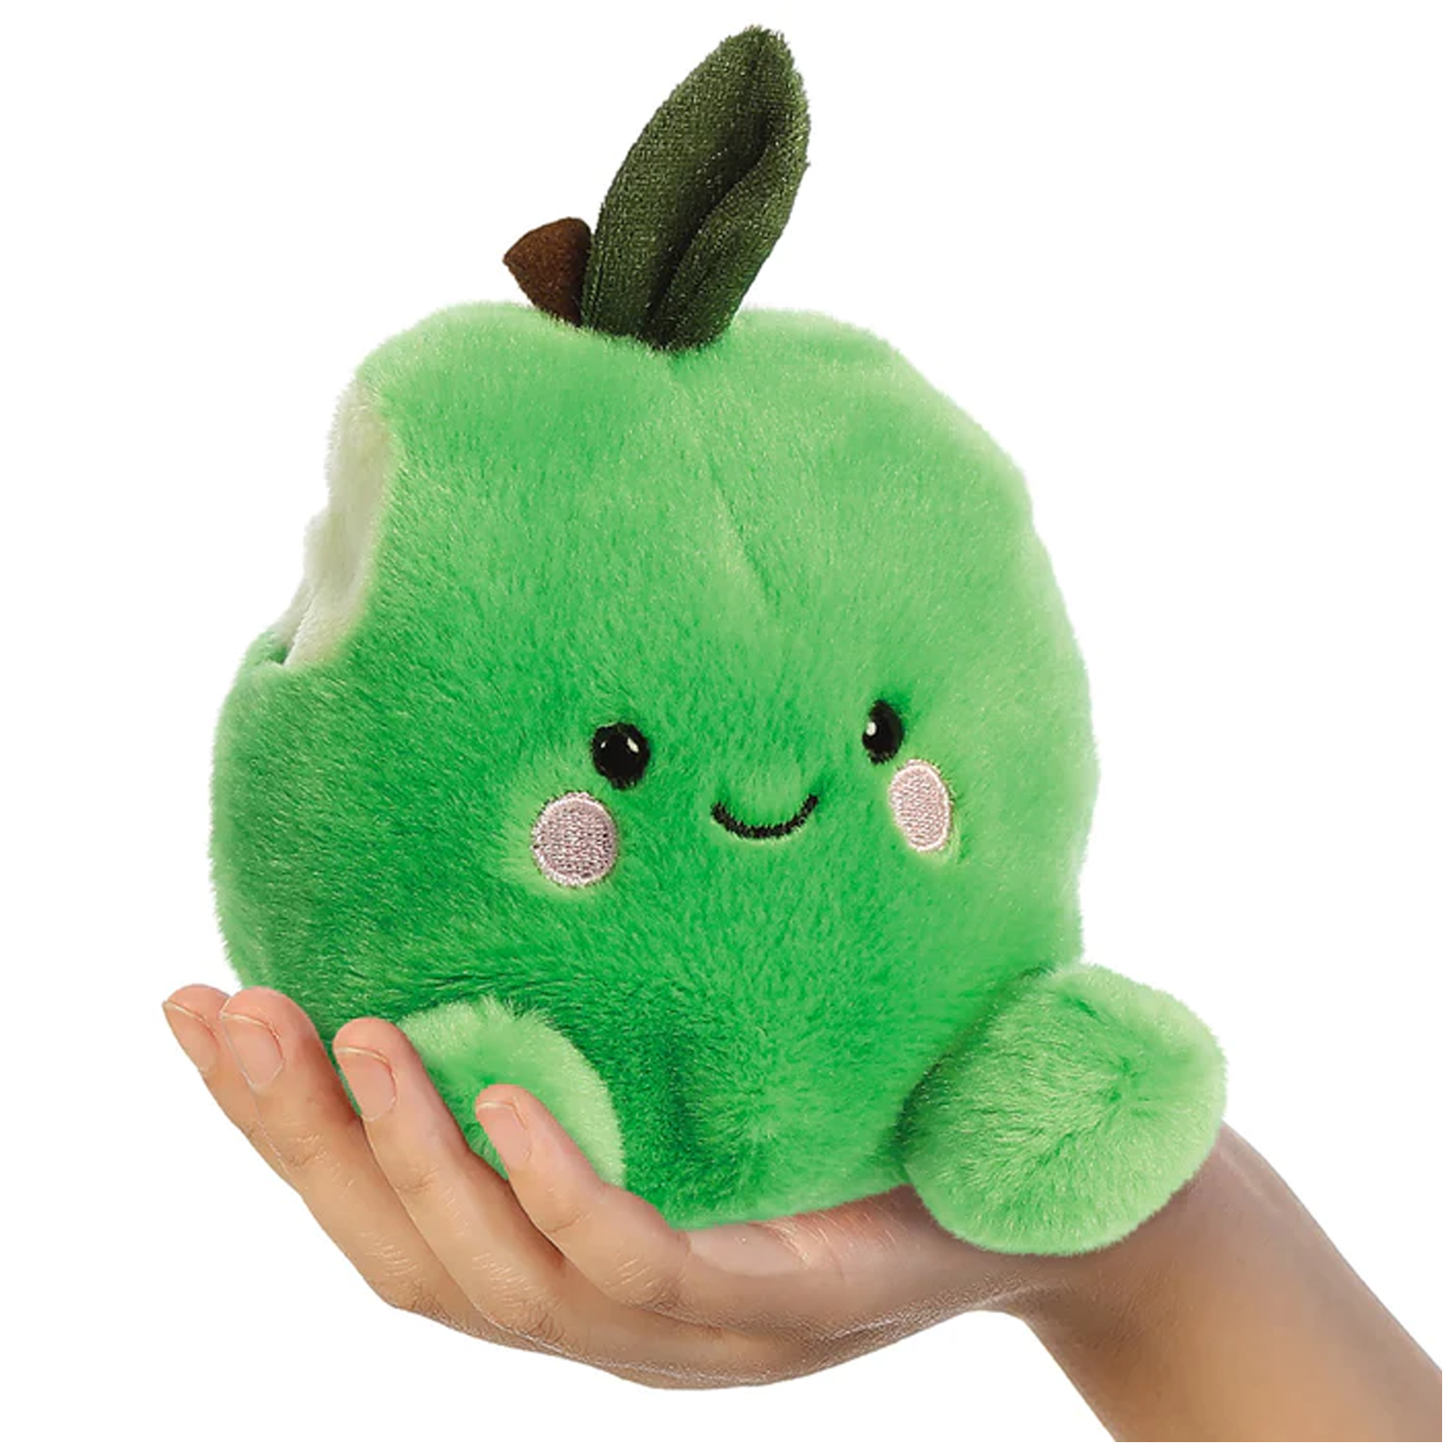 Adam the Green Apple Palm Pal Plushie Soft Toy (in a Hand) | Happy Piranha